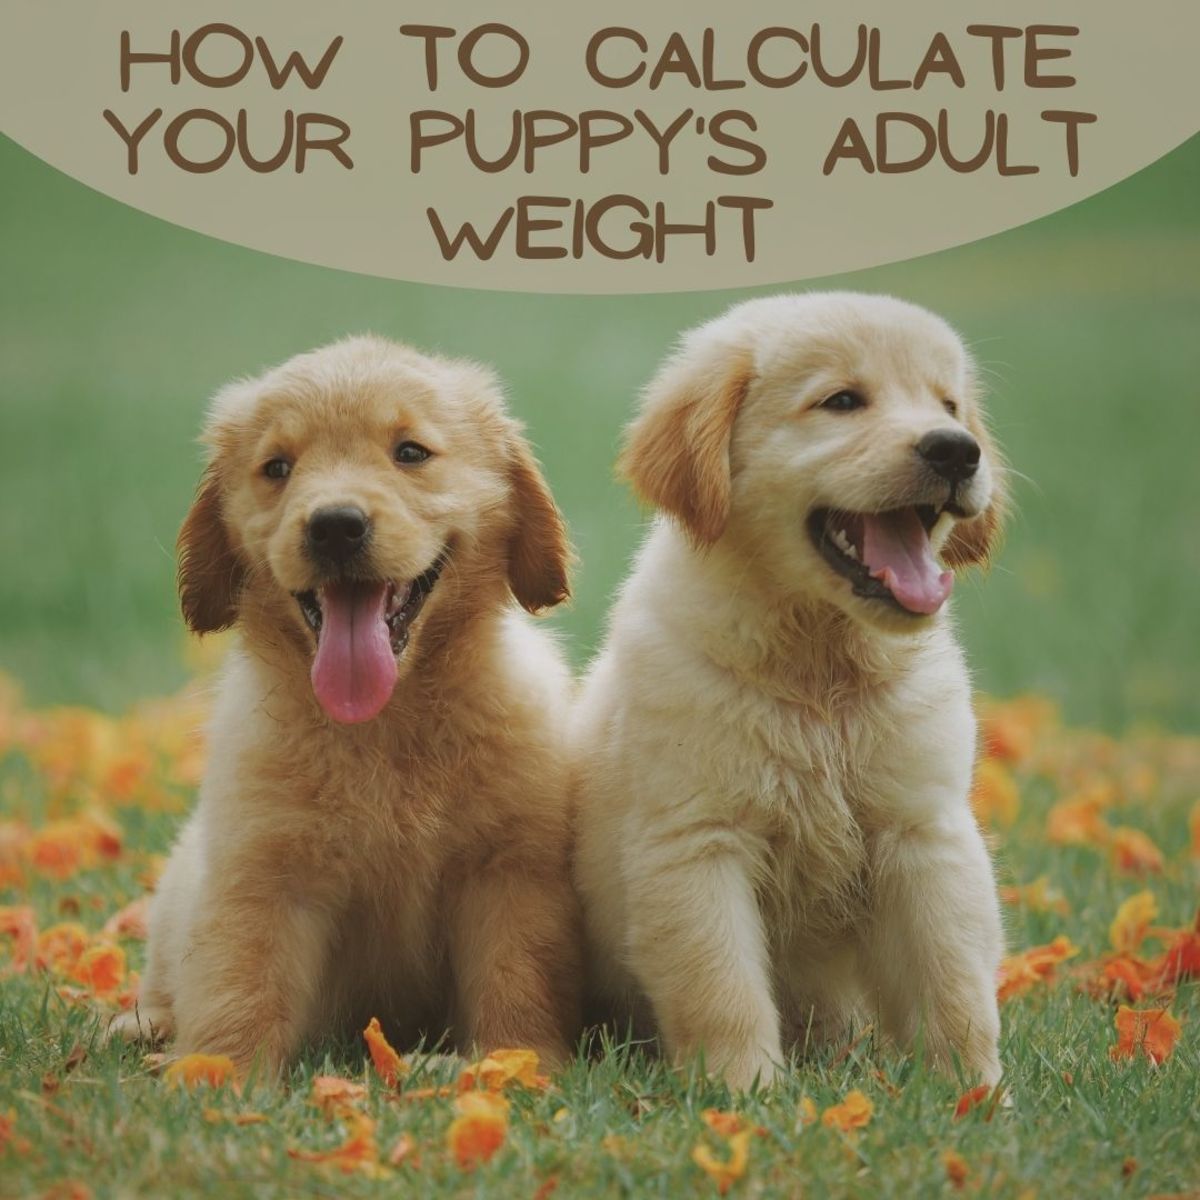 Calculating Your Puppy's Adult Weight